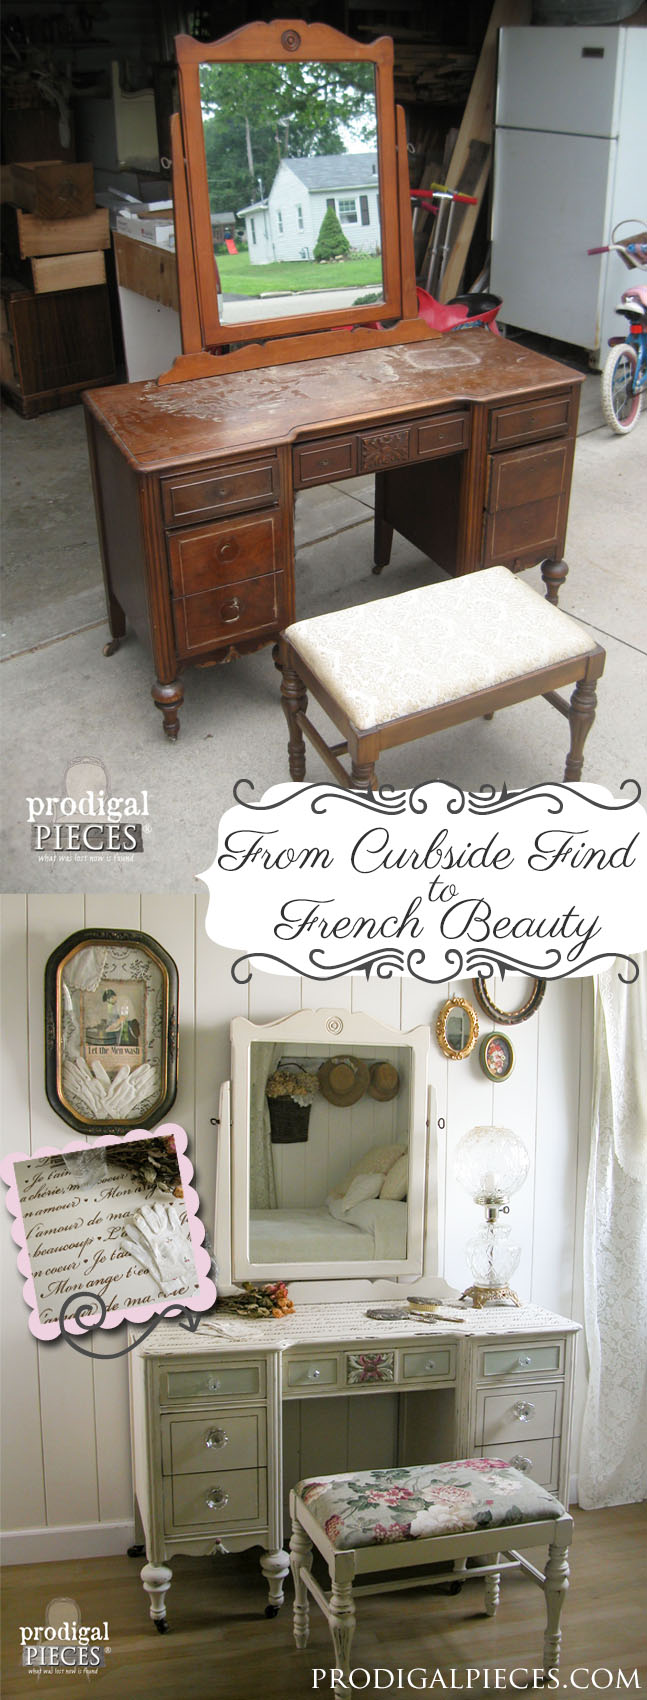 Hard to believe this antique dressing table was put curbside for city trash cleanup. From curbside to French beauty - a must see by Prodigal Pieces www.prodigalpieces.com #prodigalpieces